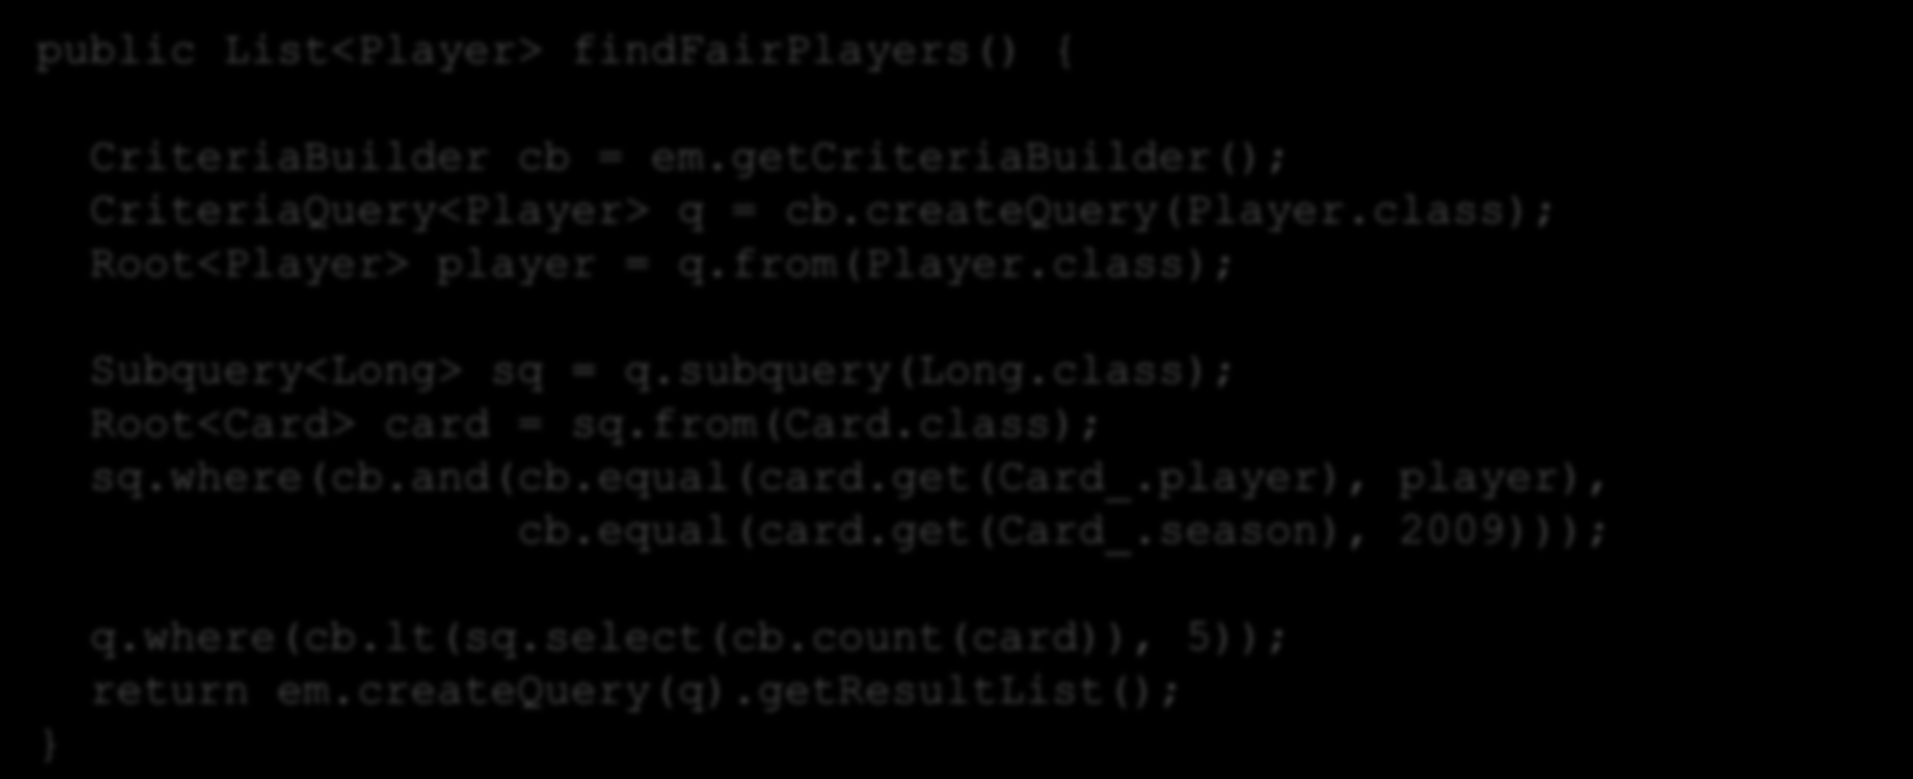 Repository Identifiziere Specification public List<Player> findfairplayers() { CriteriaBuilder cb = em.getcriteriabuilder(); CriteriaQuery<Player> q = cb.createquery(player.